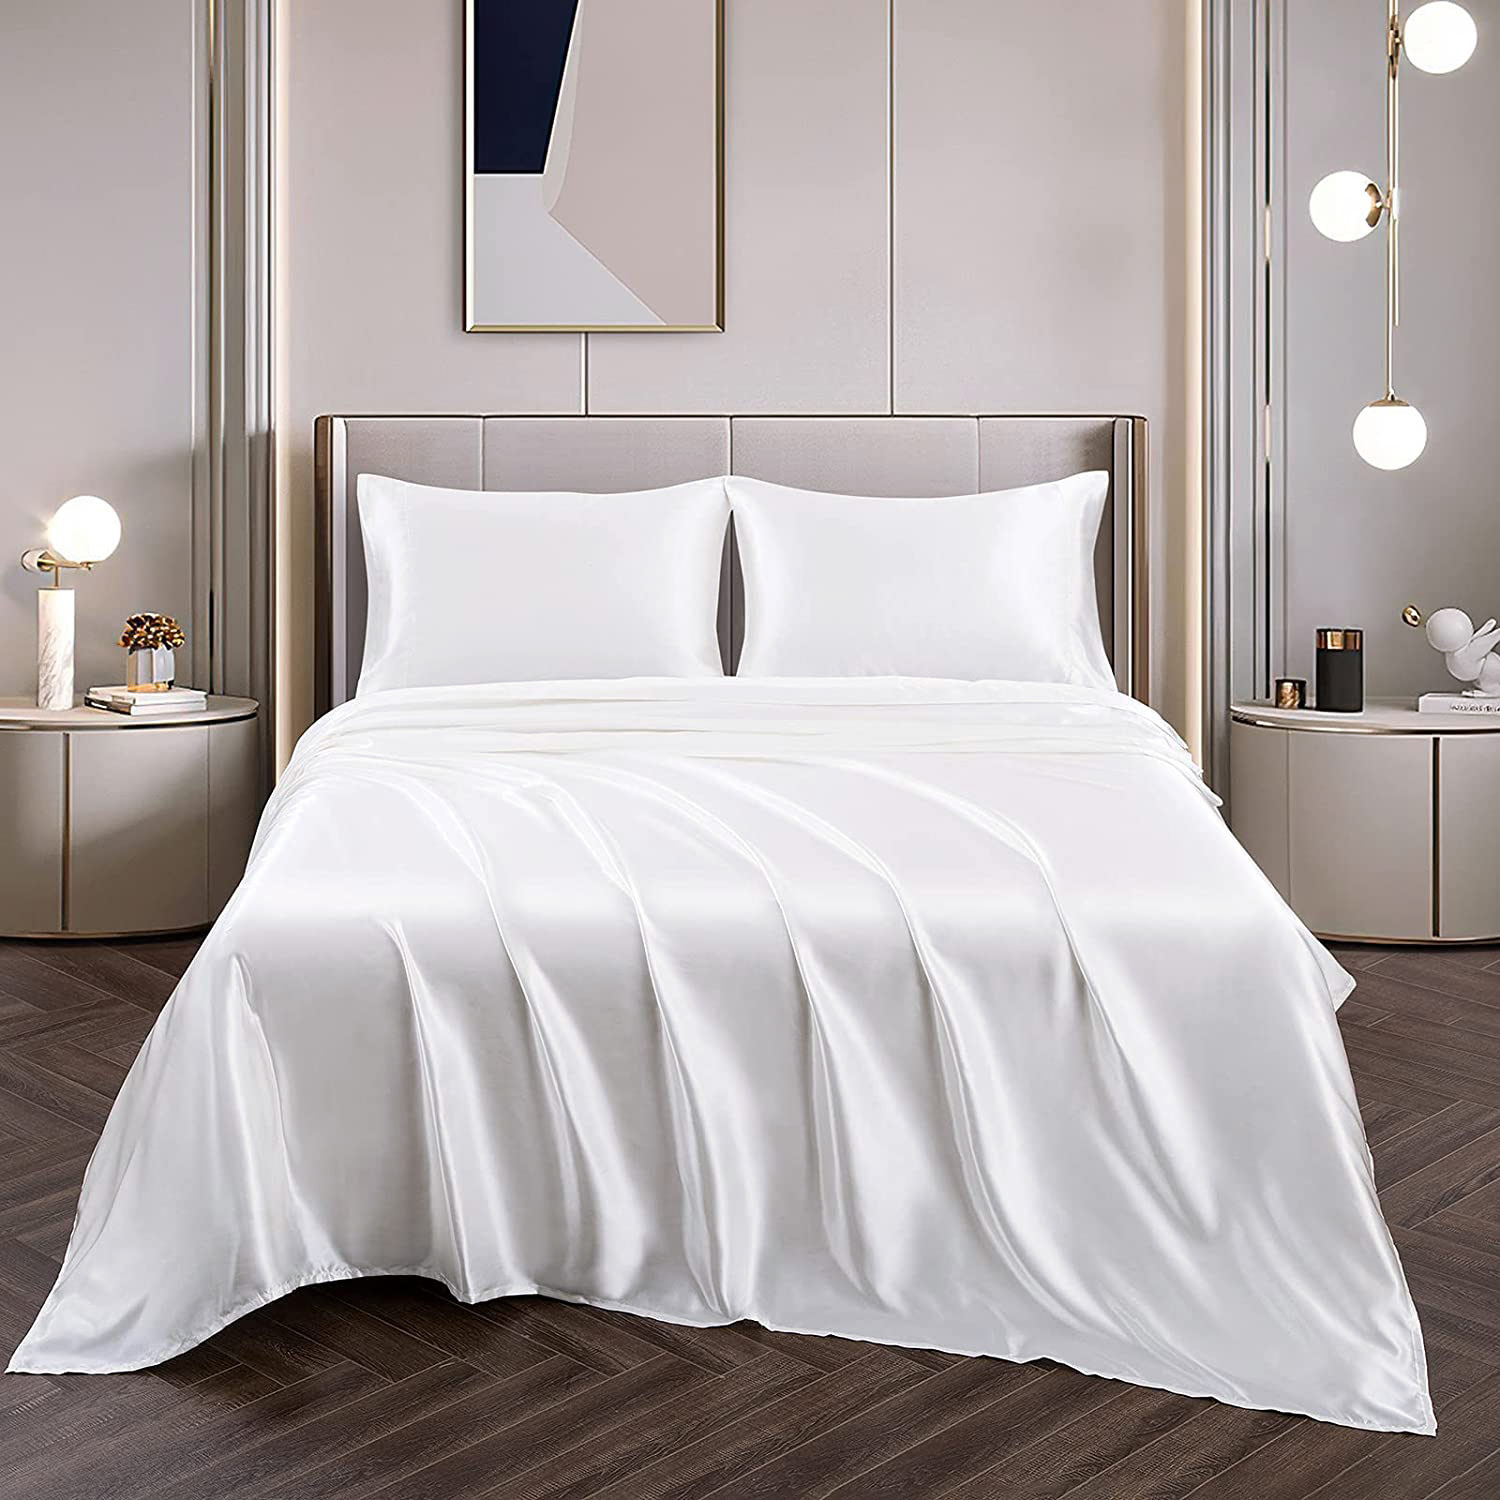 Luxury 4-Piece Silky Satin Flat Fitted Sheets Pillowcase Bed Set (White, Queen)